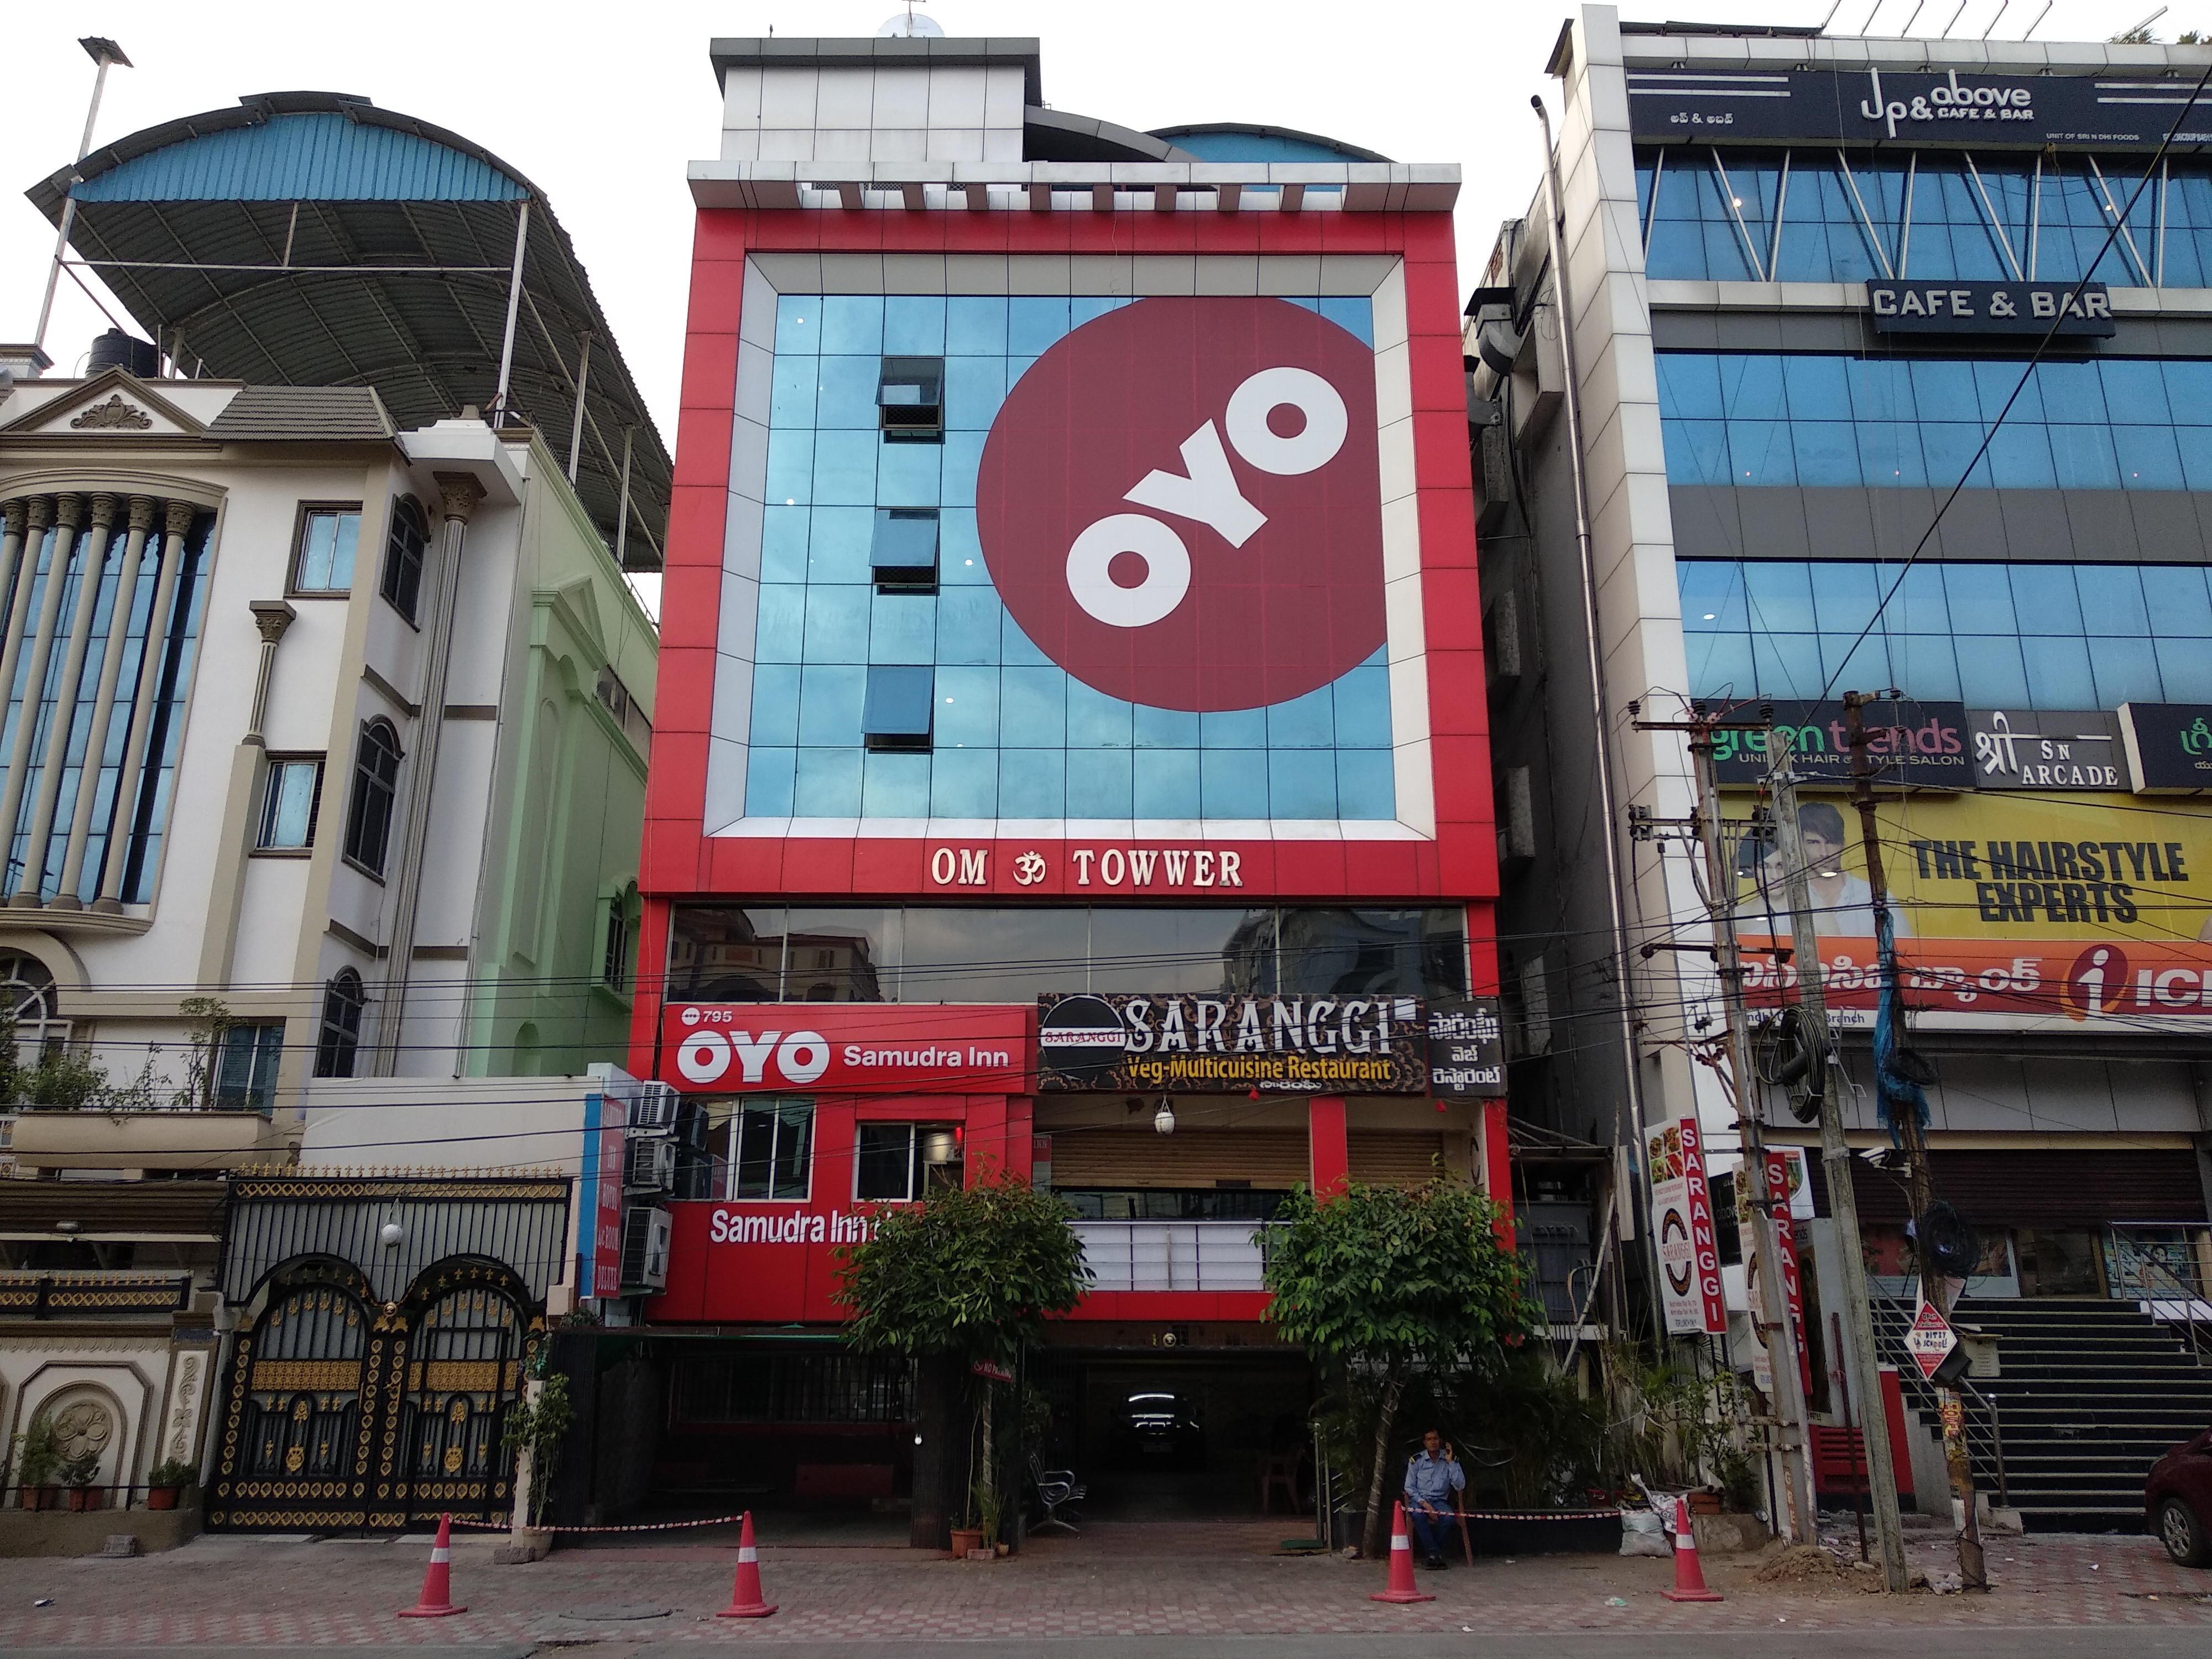 Oyo receives USD 807 million from SoftBank Vision Fund and RA Hospitality